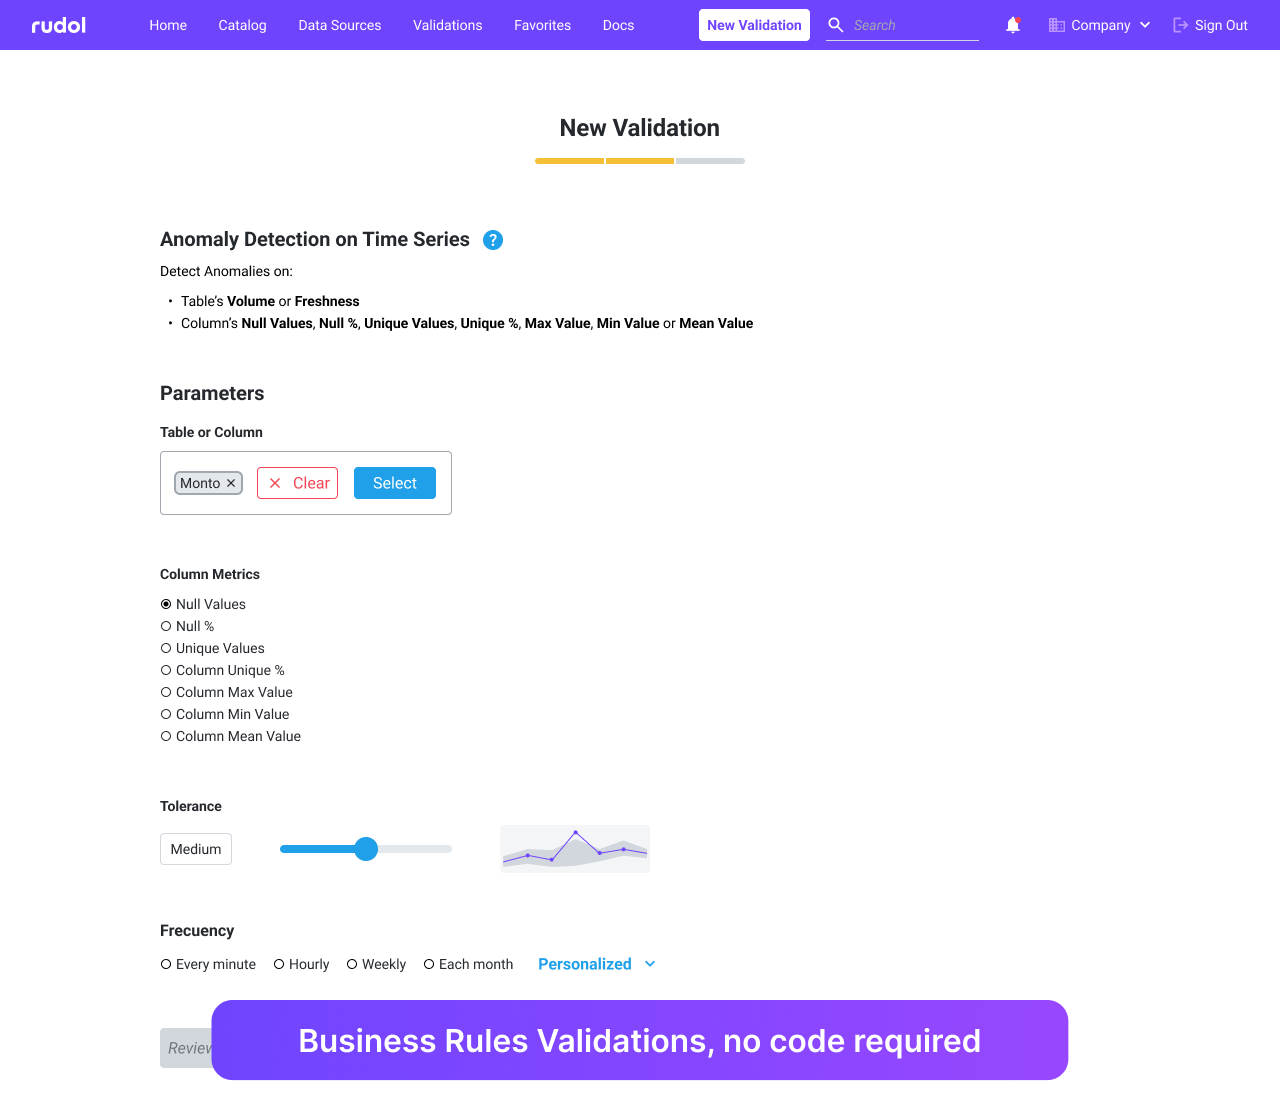 Business Rules Validations, no code required